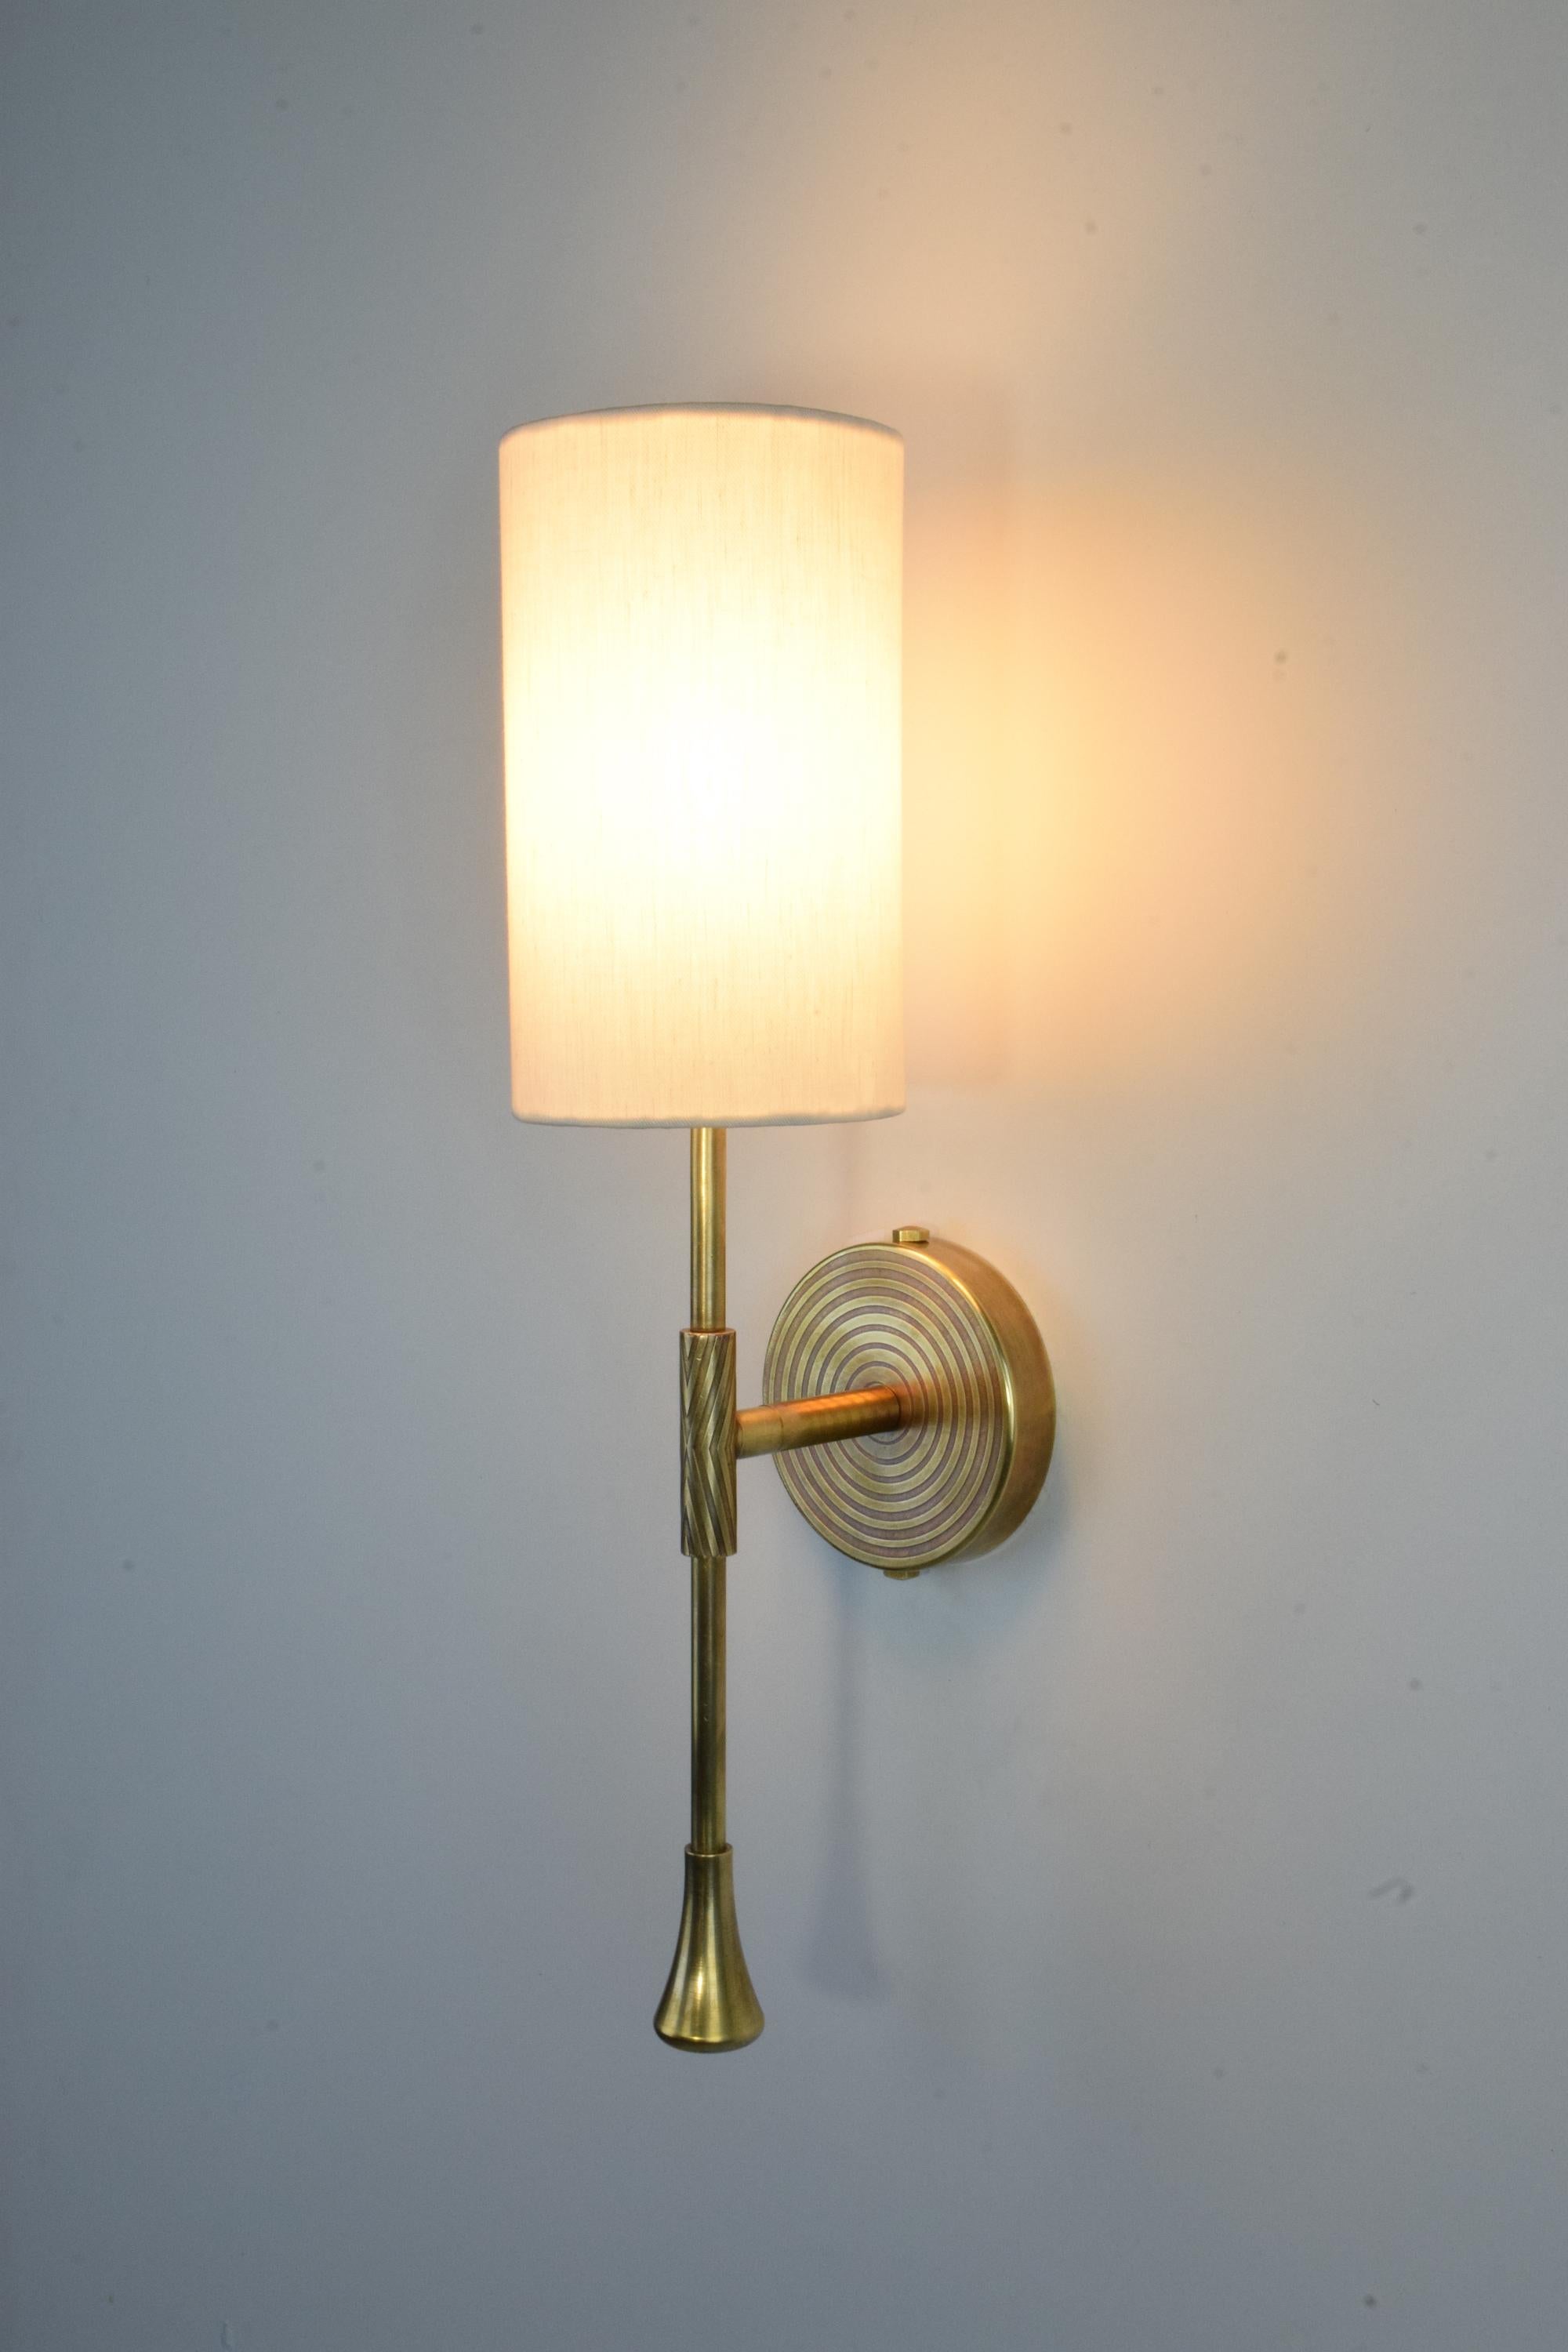 Daya is a timeless wall light built in a solid brass structure with a cylinder white fabric shade and modern hand engravings on the wallplate and stem.
The engravings are optionable. 

Light source
1x60 W Max E14
230 V - LED Integrated 120 V -